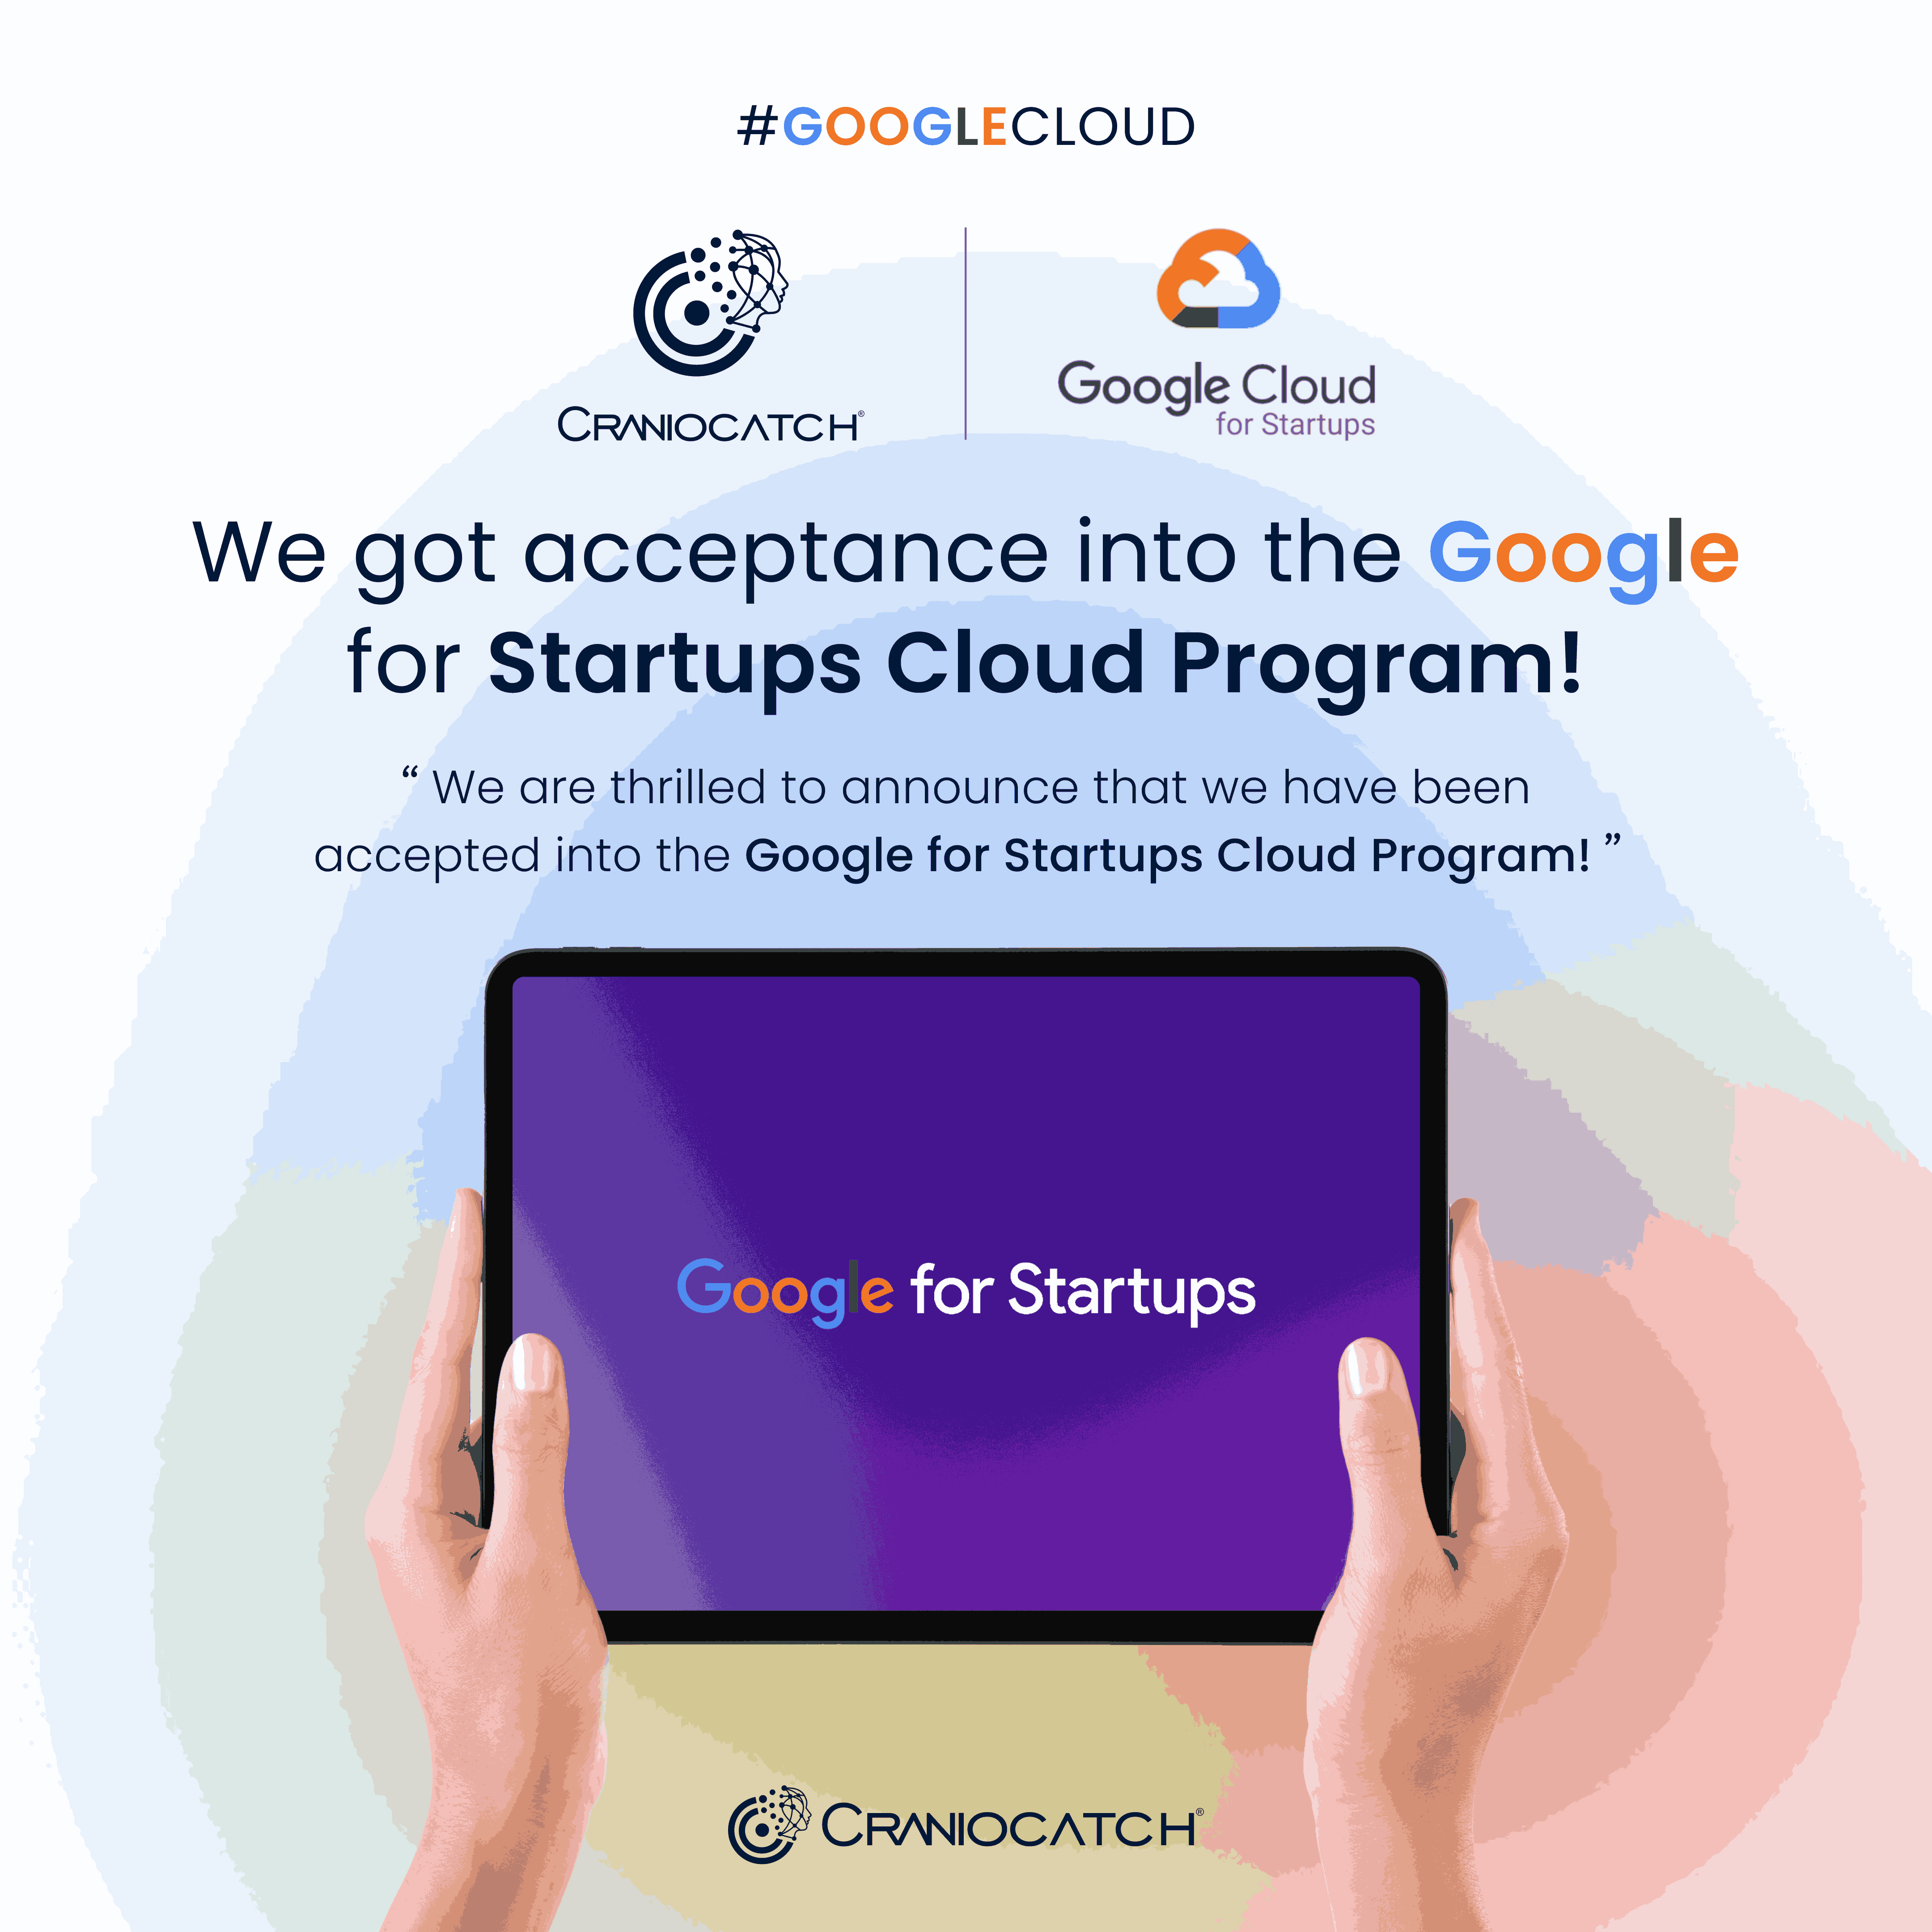 Our company has been acceptance into the Google for Startups Cloud Program.